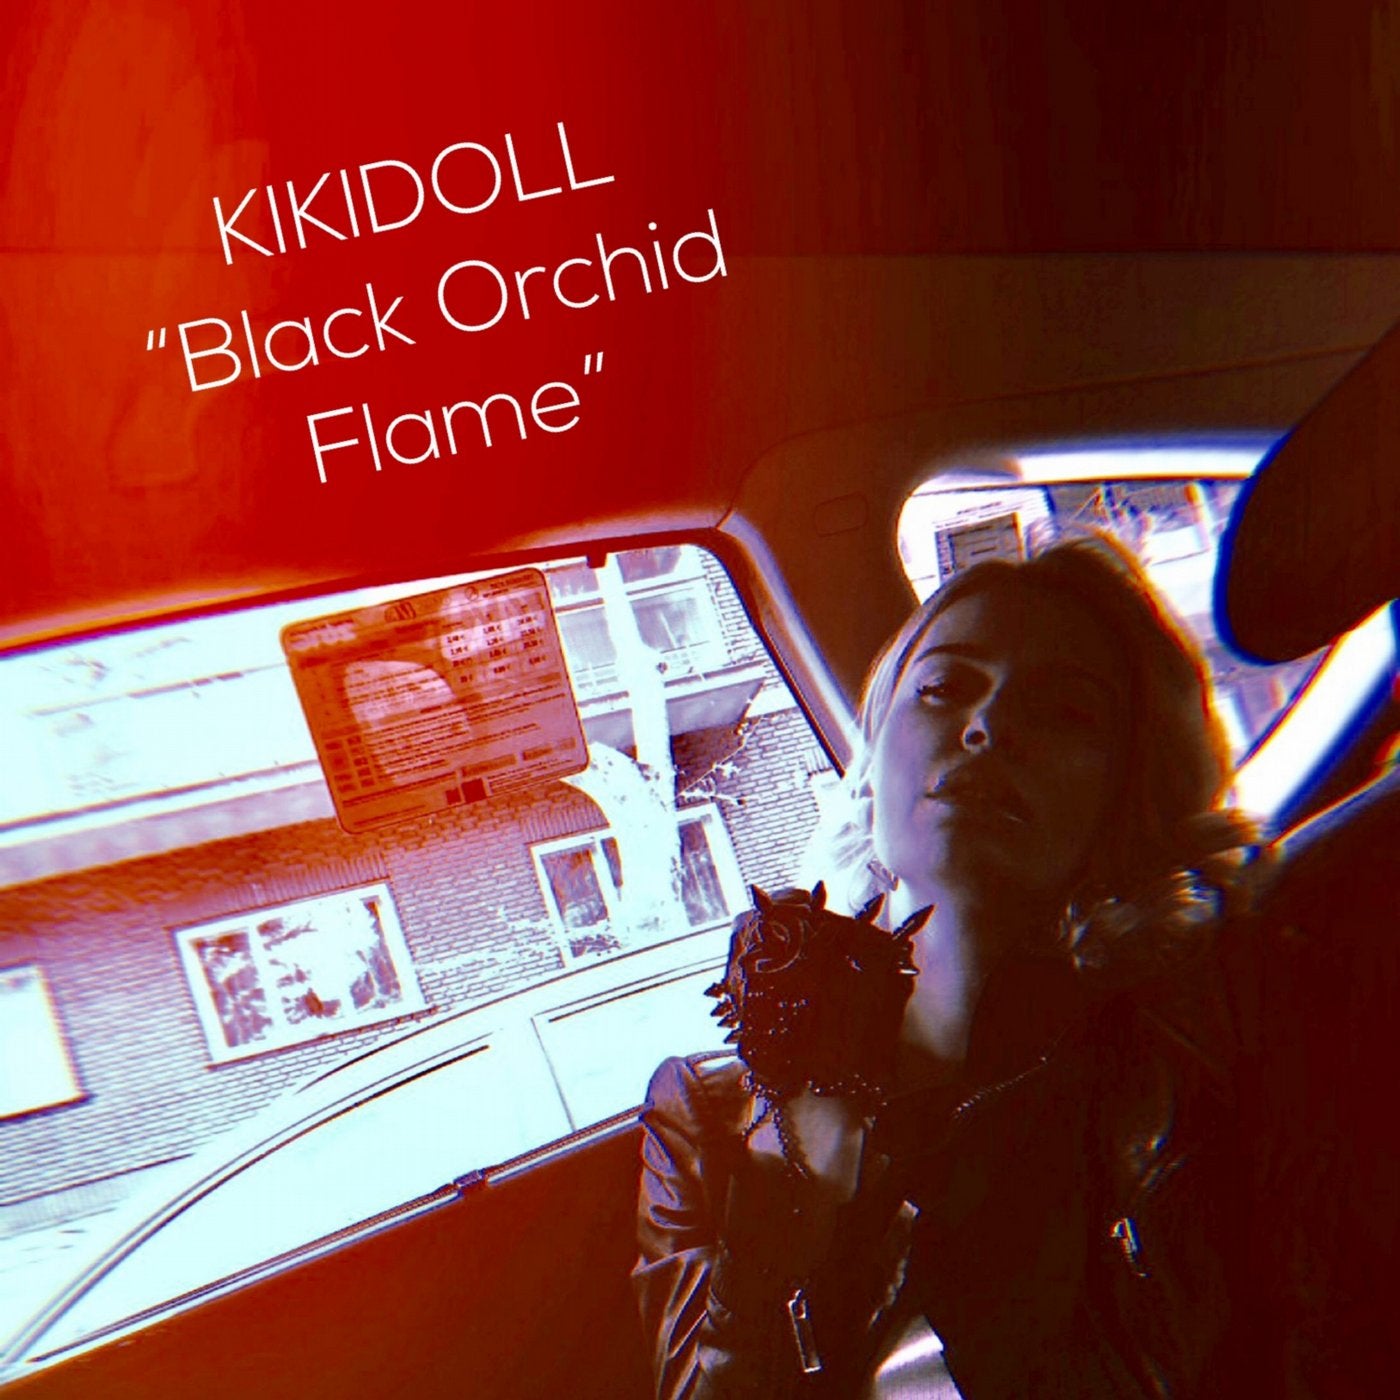 Black Orchid Flame